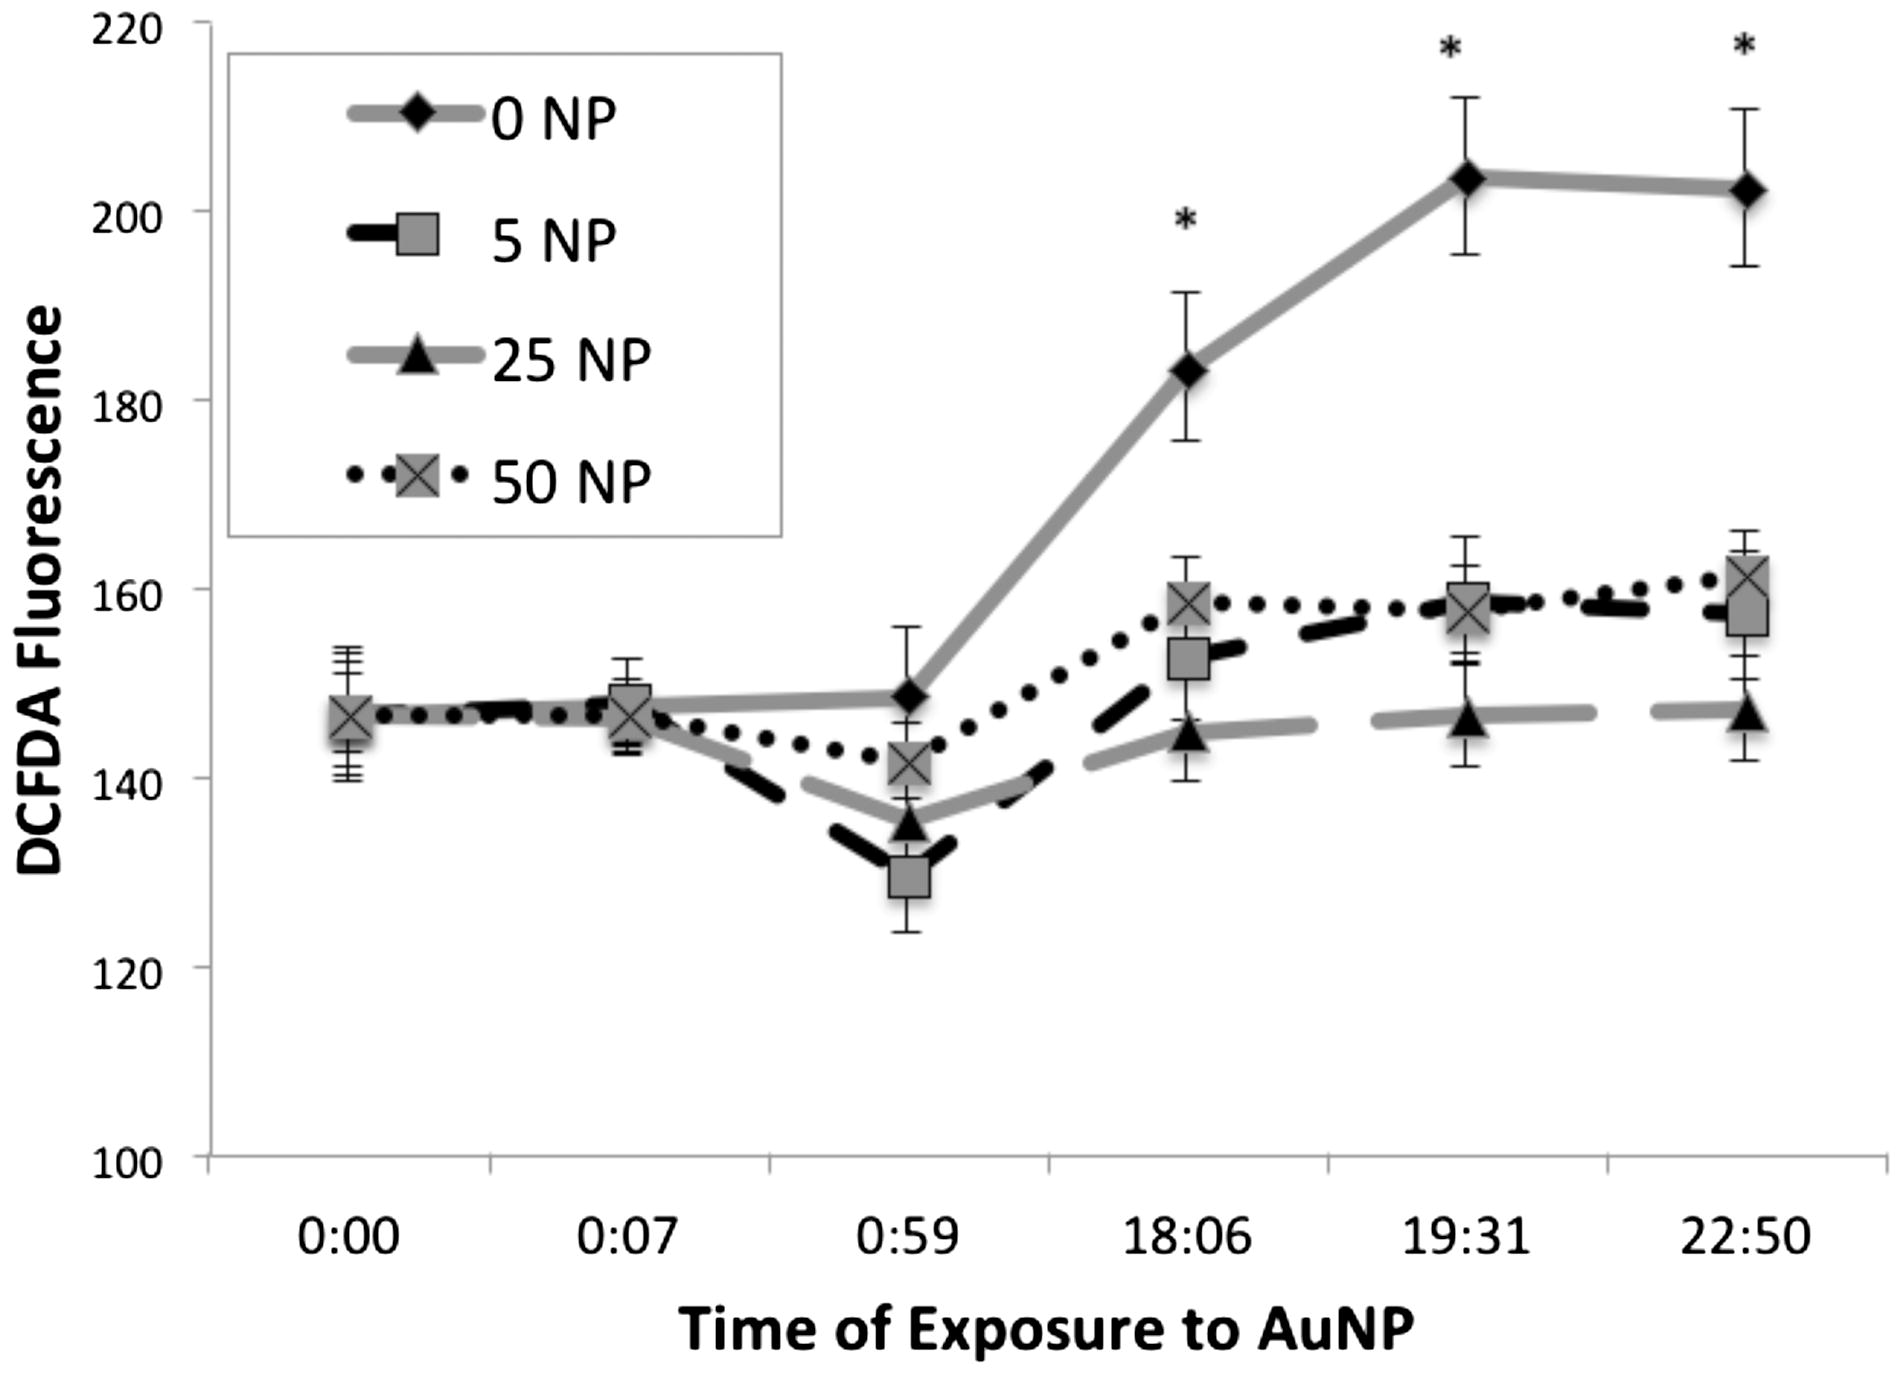 Figure 5. AuNP quenched production of ROS. ROS was measured in RAW macrophage cells treated with BioPure AuNP at different timepoints and concentrations of 0, 5, 25 and 50 µg/ml. Untreated values increased over time and were statistically different from all treatment groups after 18 h. n = 4 in each group. *p < 0.001 [ANOVA].